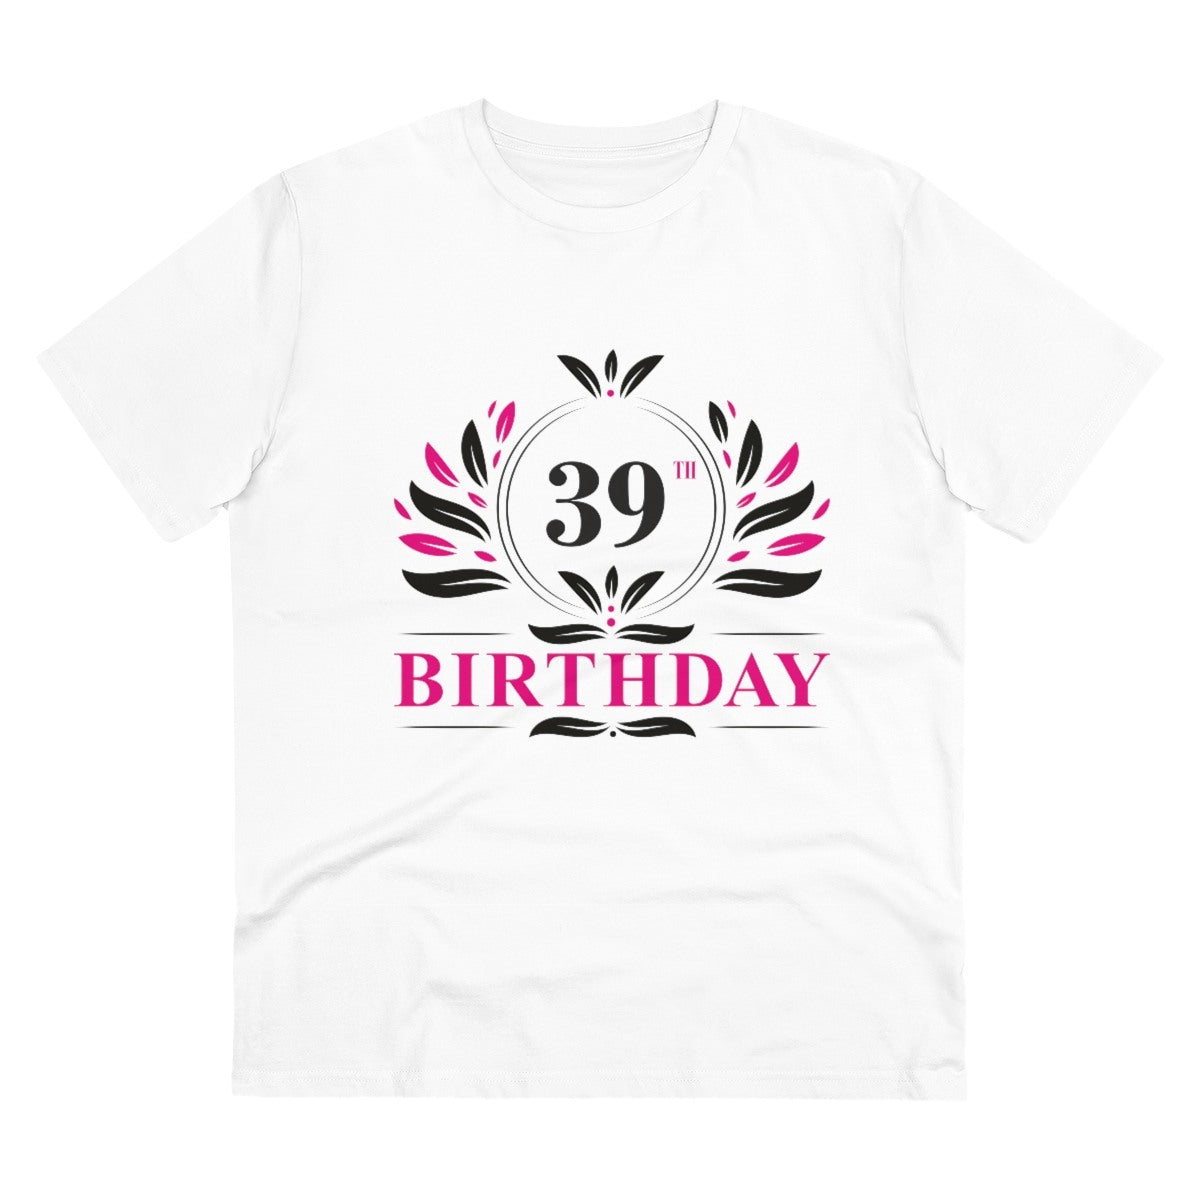 Men's PC Cotton 39th Birthday Printed T Shirt (Color: White, Thread Count: 180GSM) - GillKart